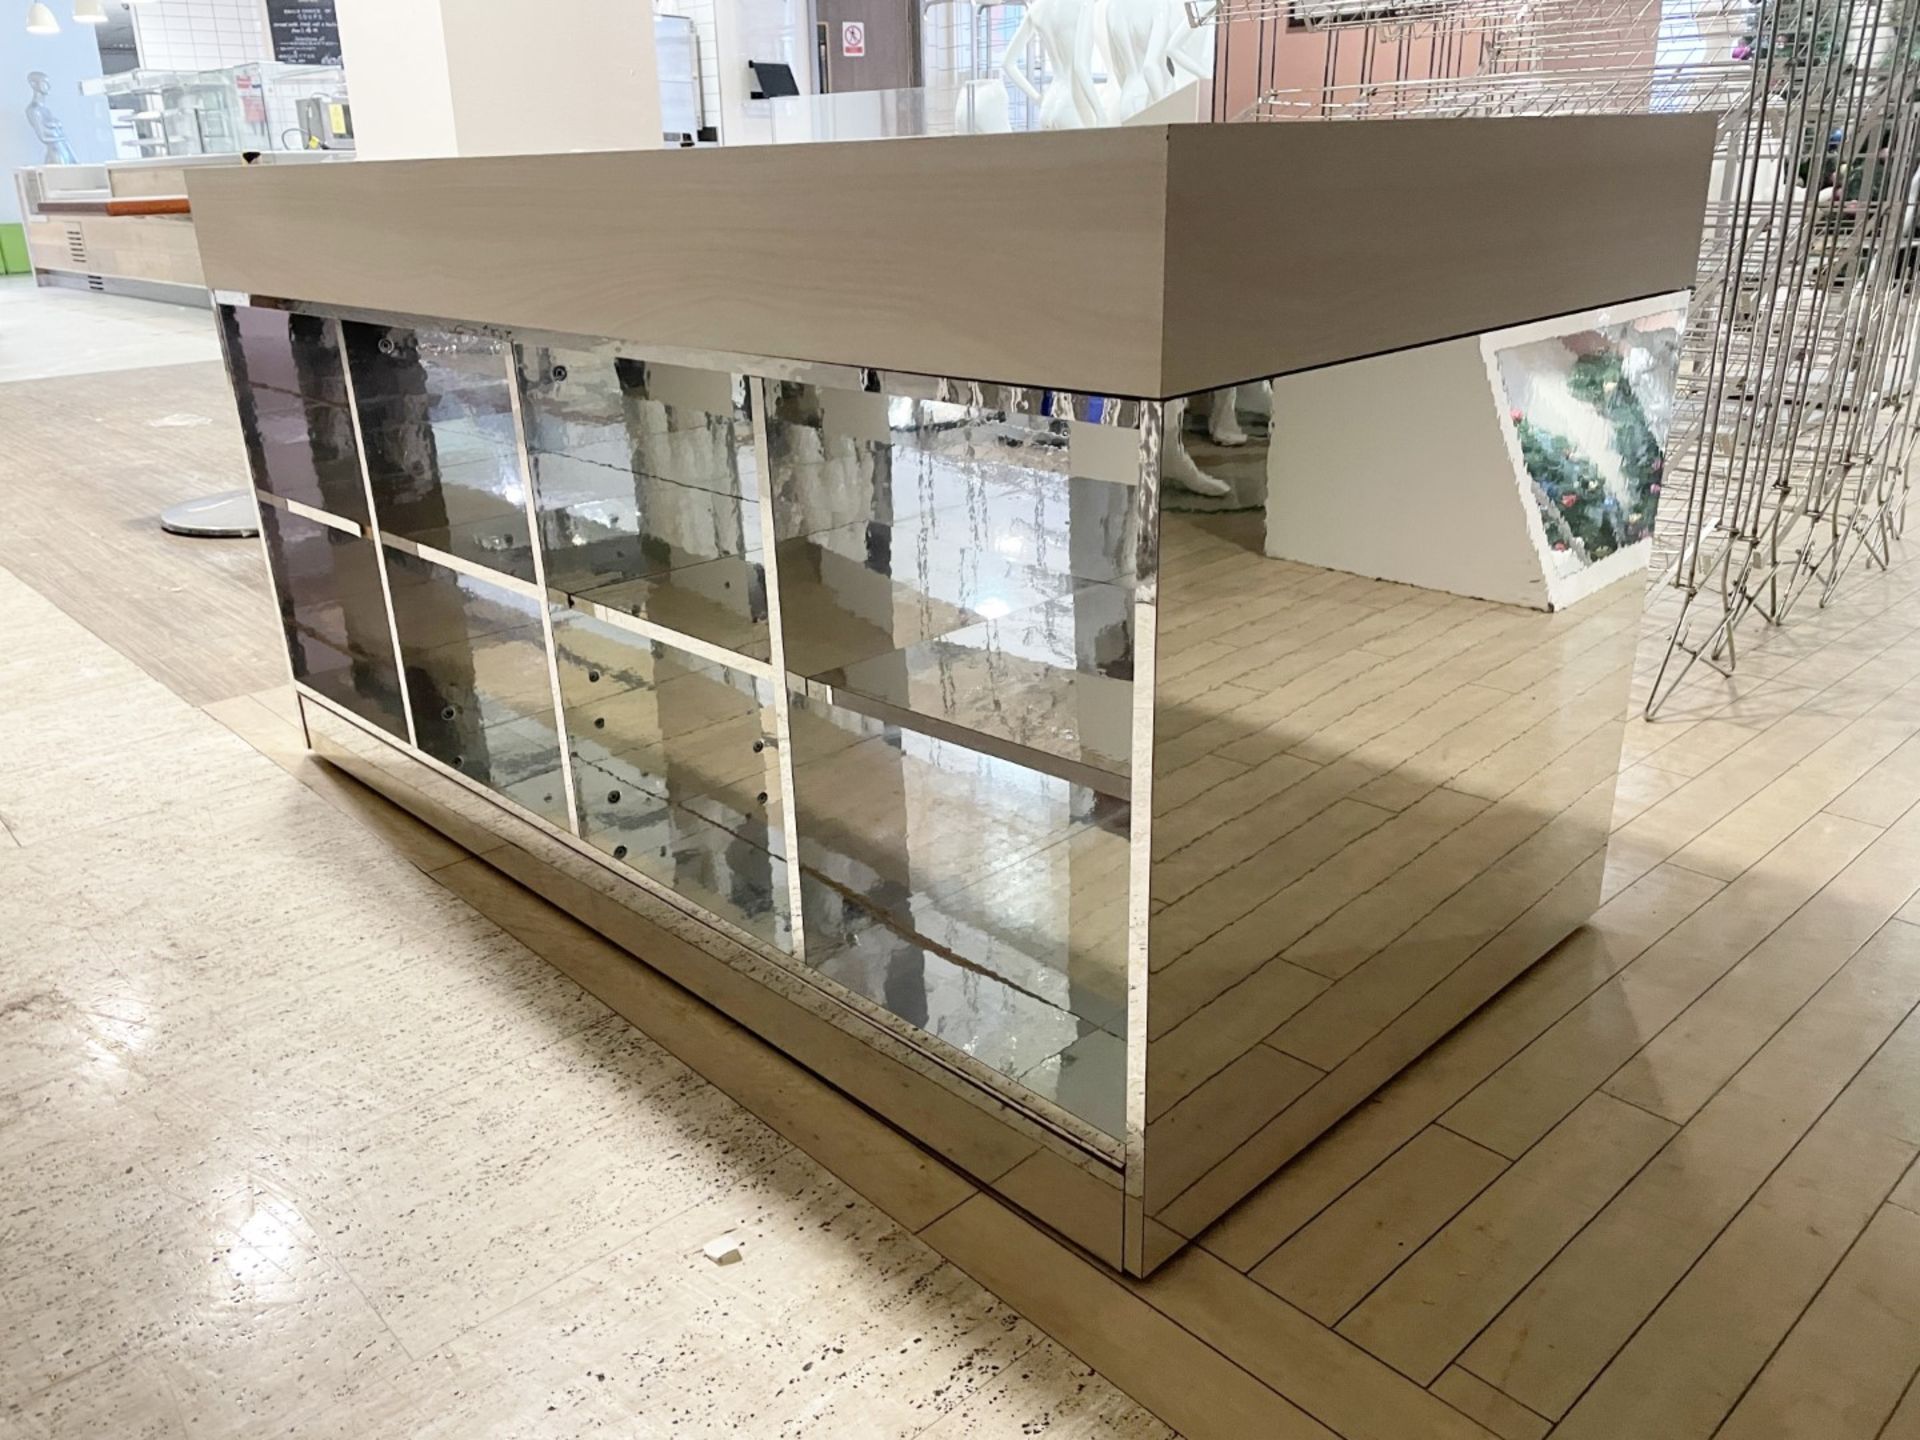 1 x Retail Display Island With Ash Wooden Top and Mirrored Side Shelves and Panels - Size 82 x - Image 3 of 6